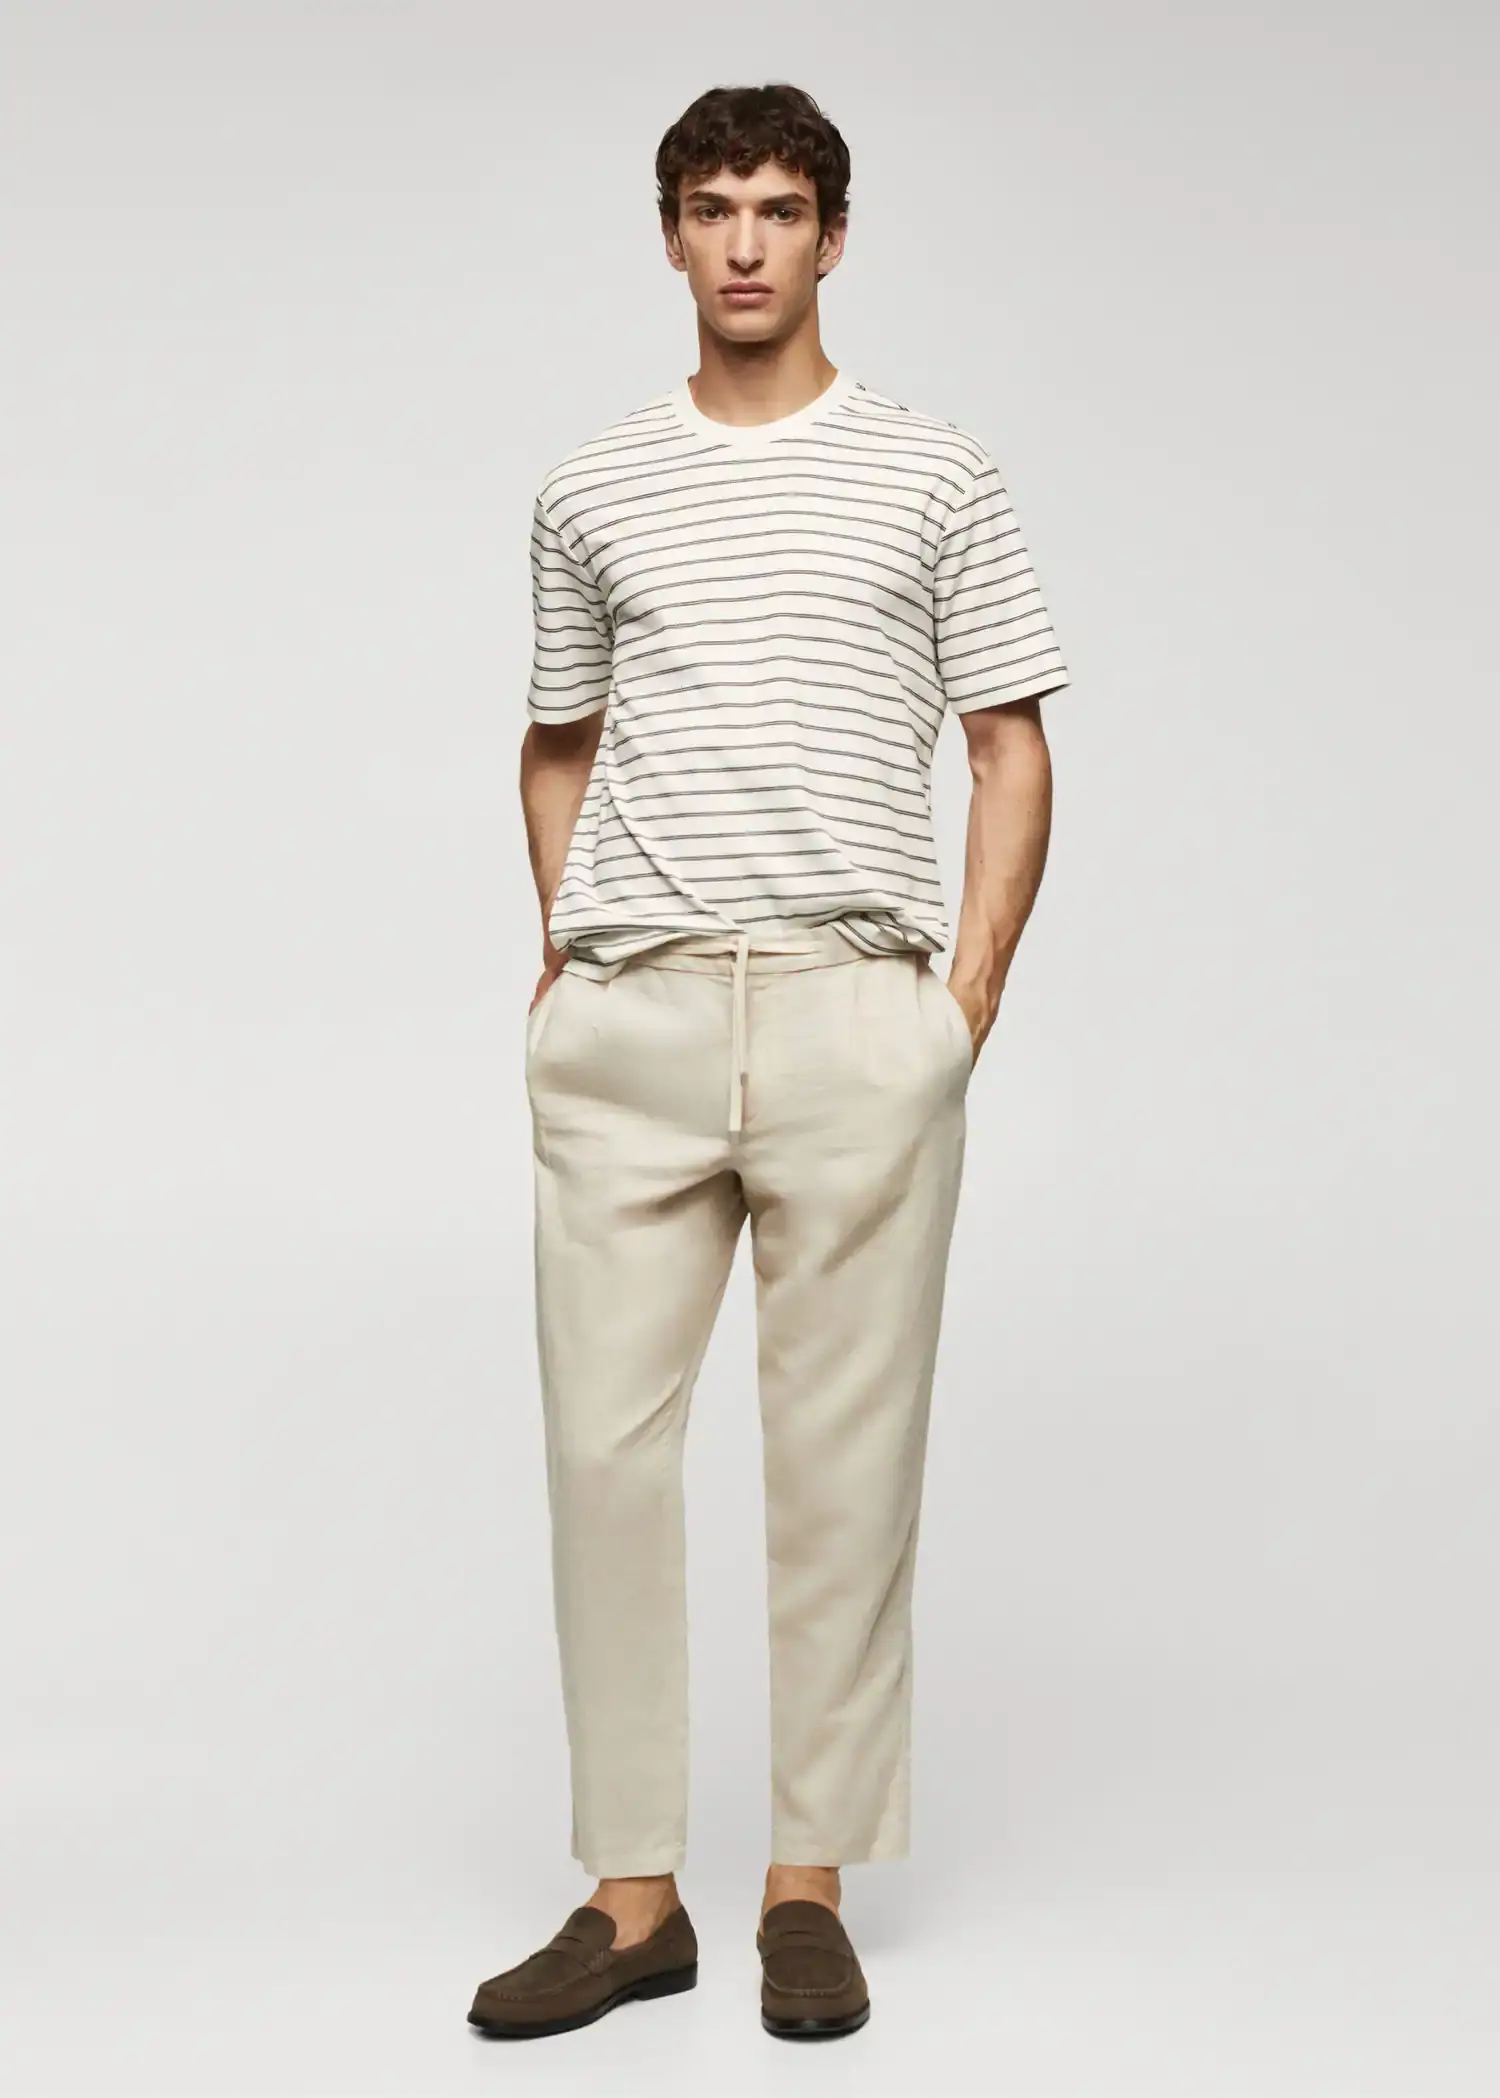 Mango Striped 100% cotton t-shirt. a man in a striped t-shirt and a pair of pants. 